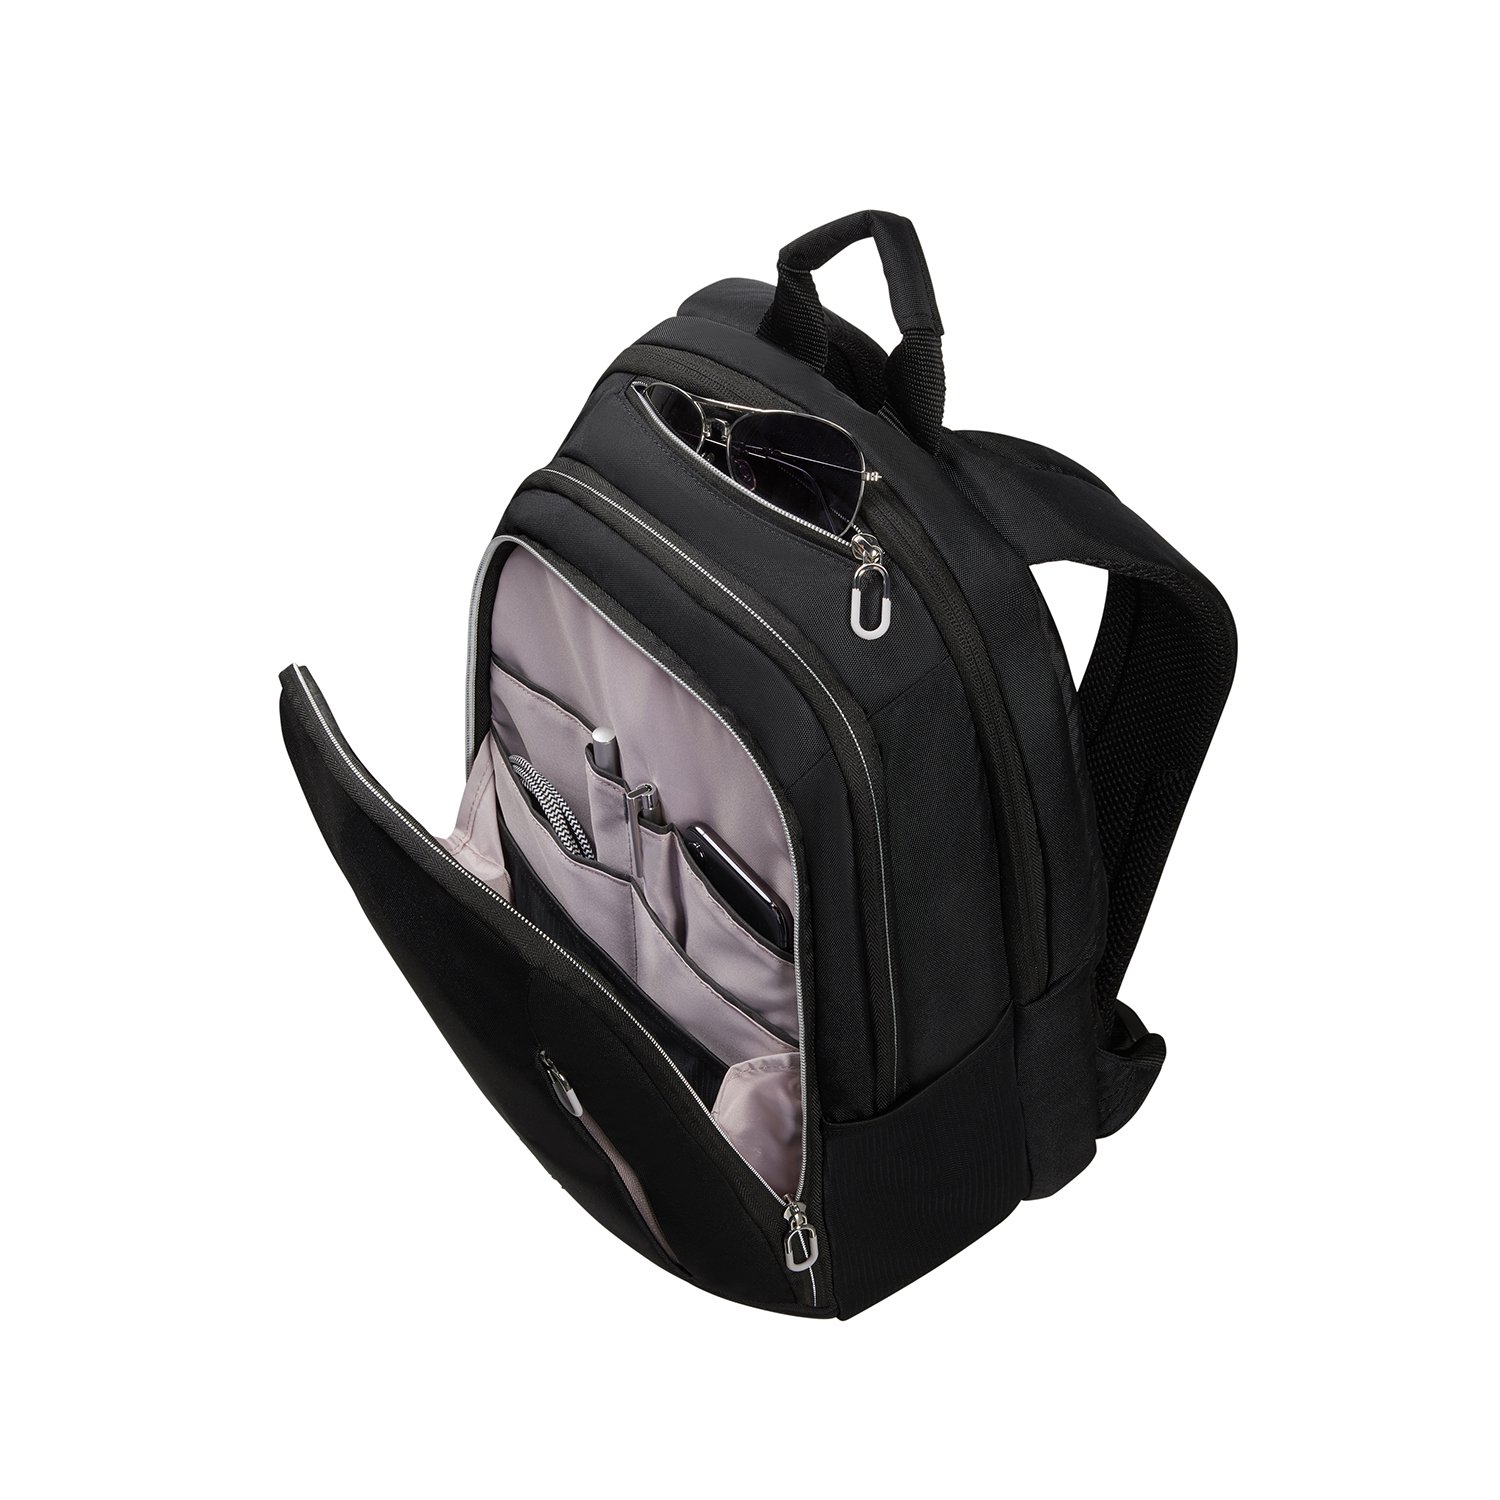 GUARDIT CLASSY-BACKPACK 14.1"" SKH1-002-SF000*09